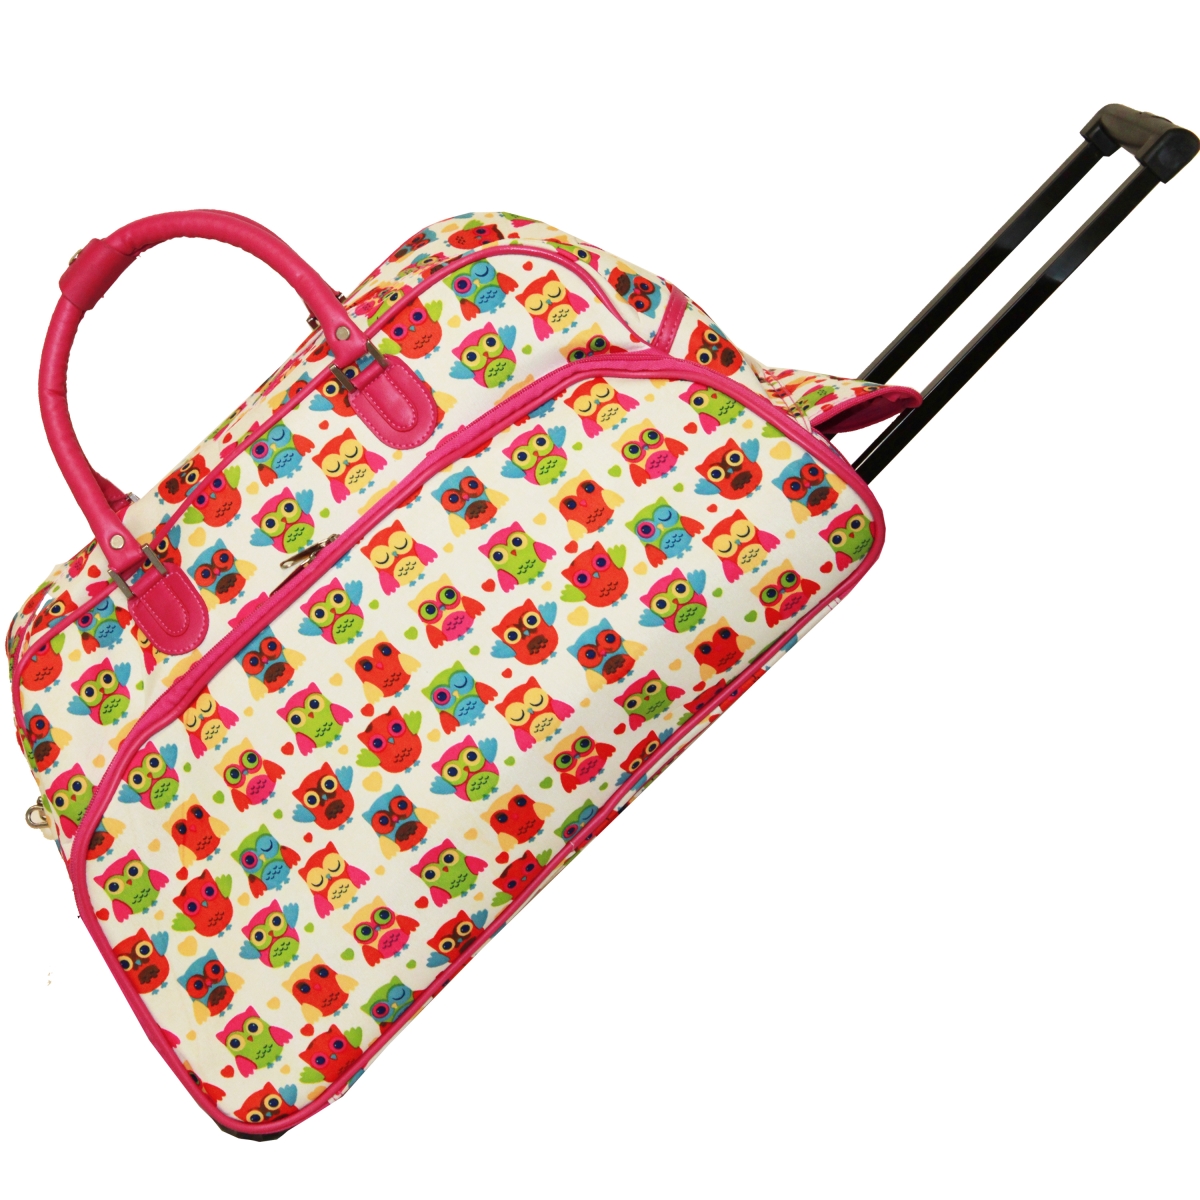 8112022-176 21 In. Carry On Rolling Duffel Bag - Owl Pink